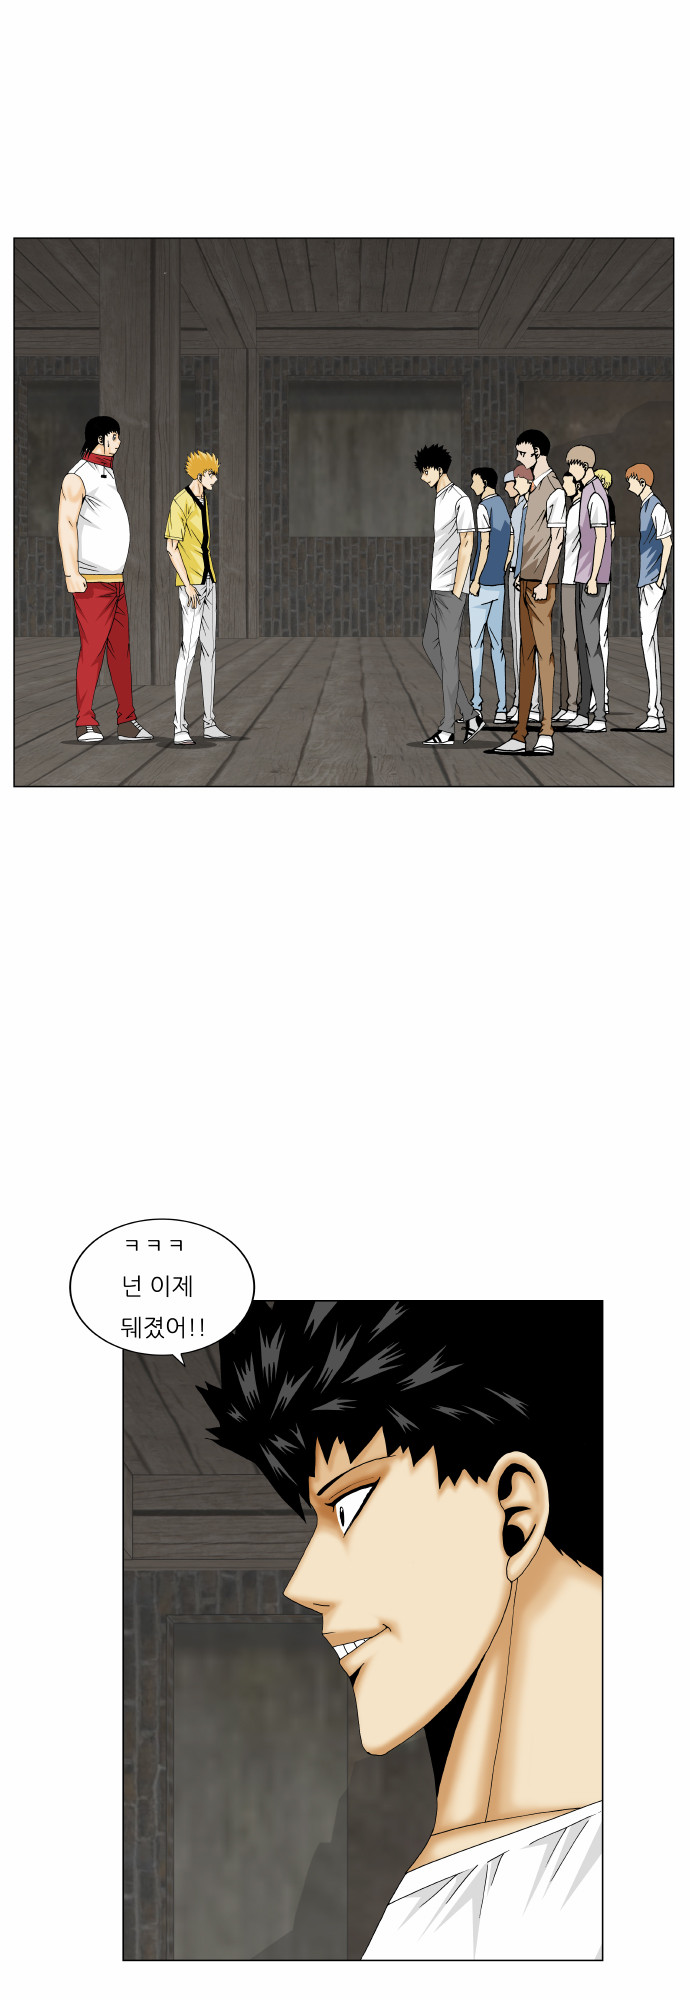 Ultimate Legend - Kang Hae Hyo - Chapter 170 - Page 3